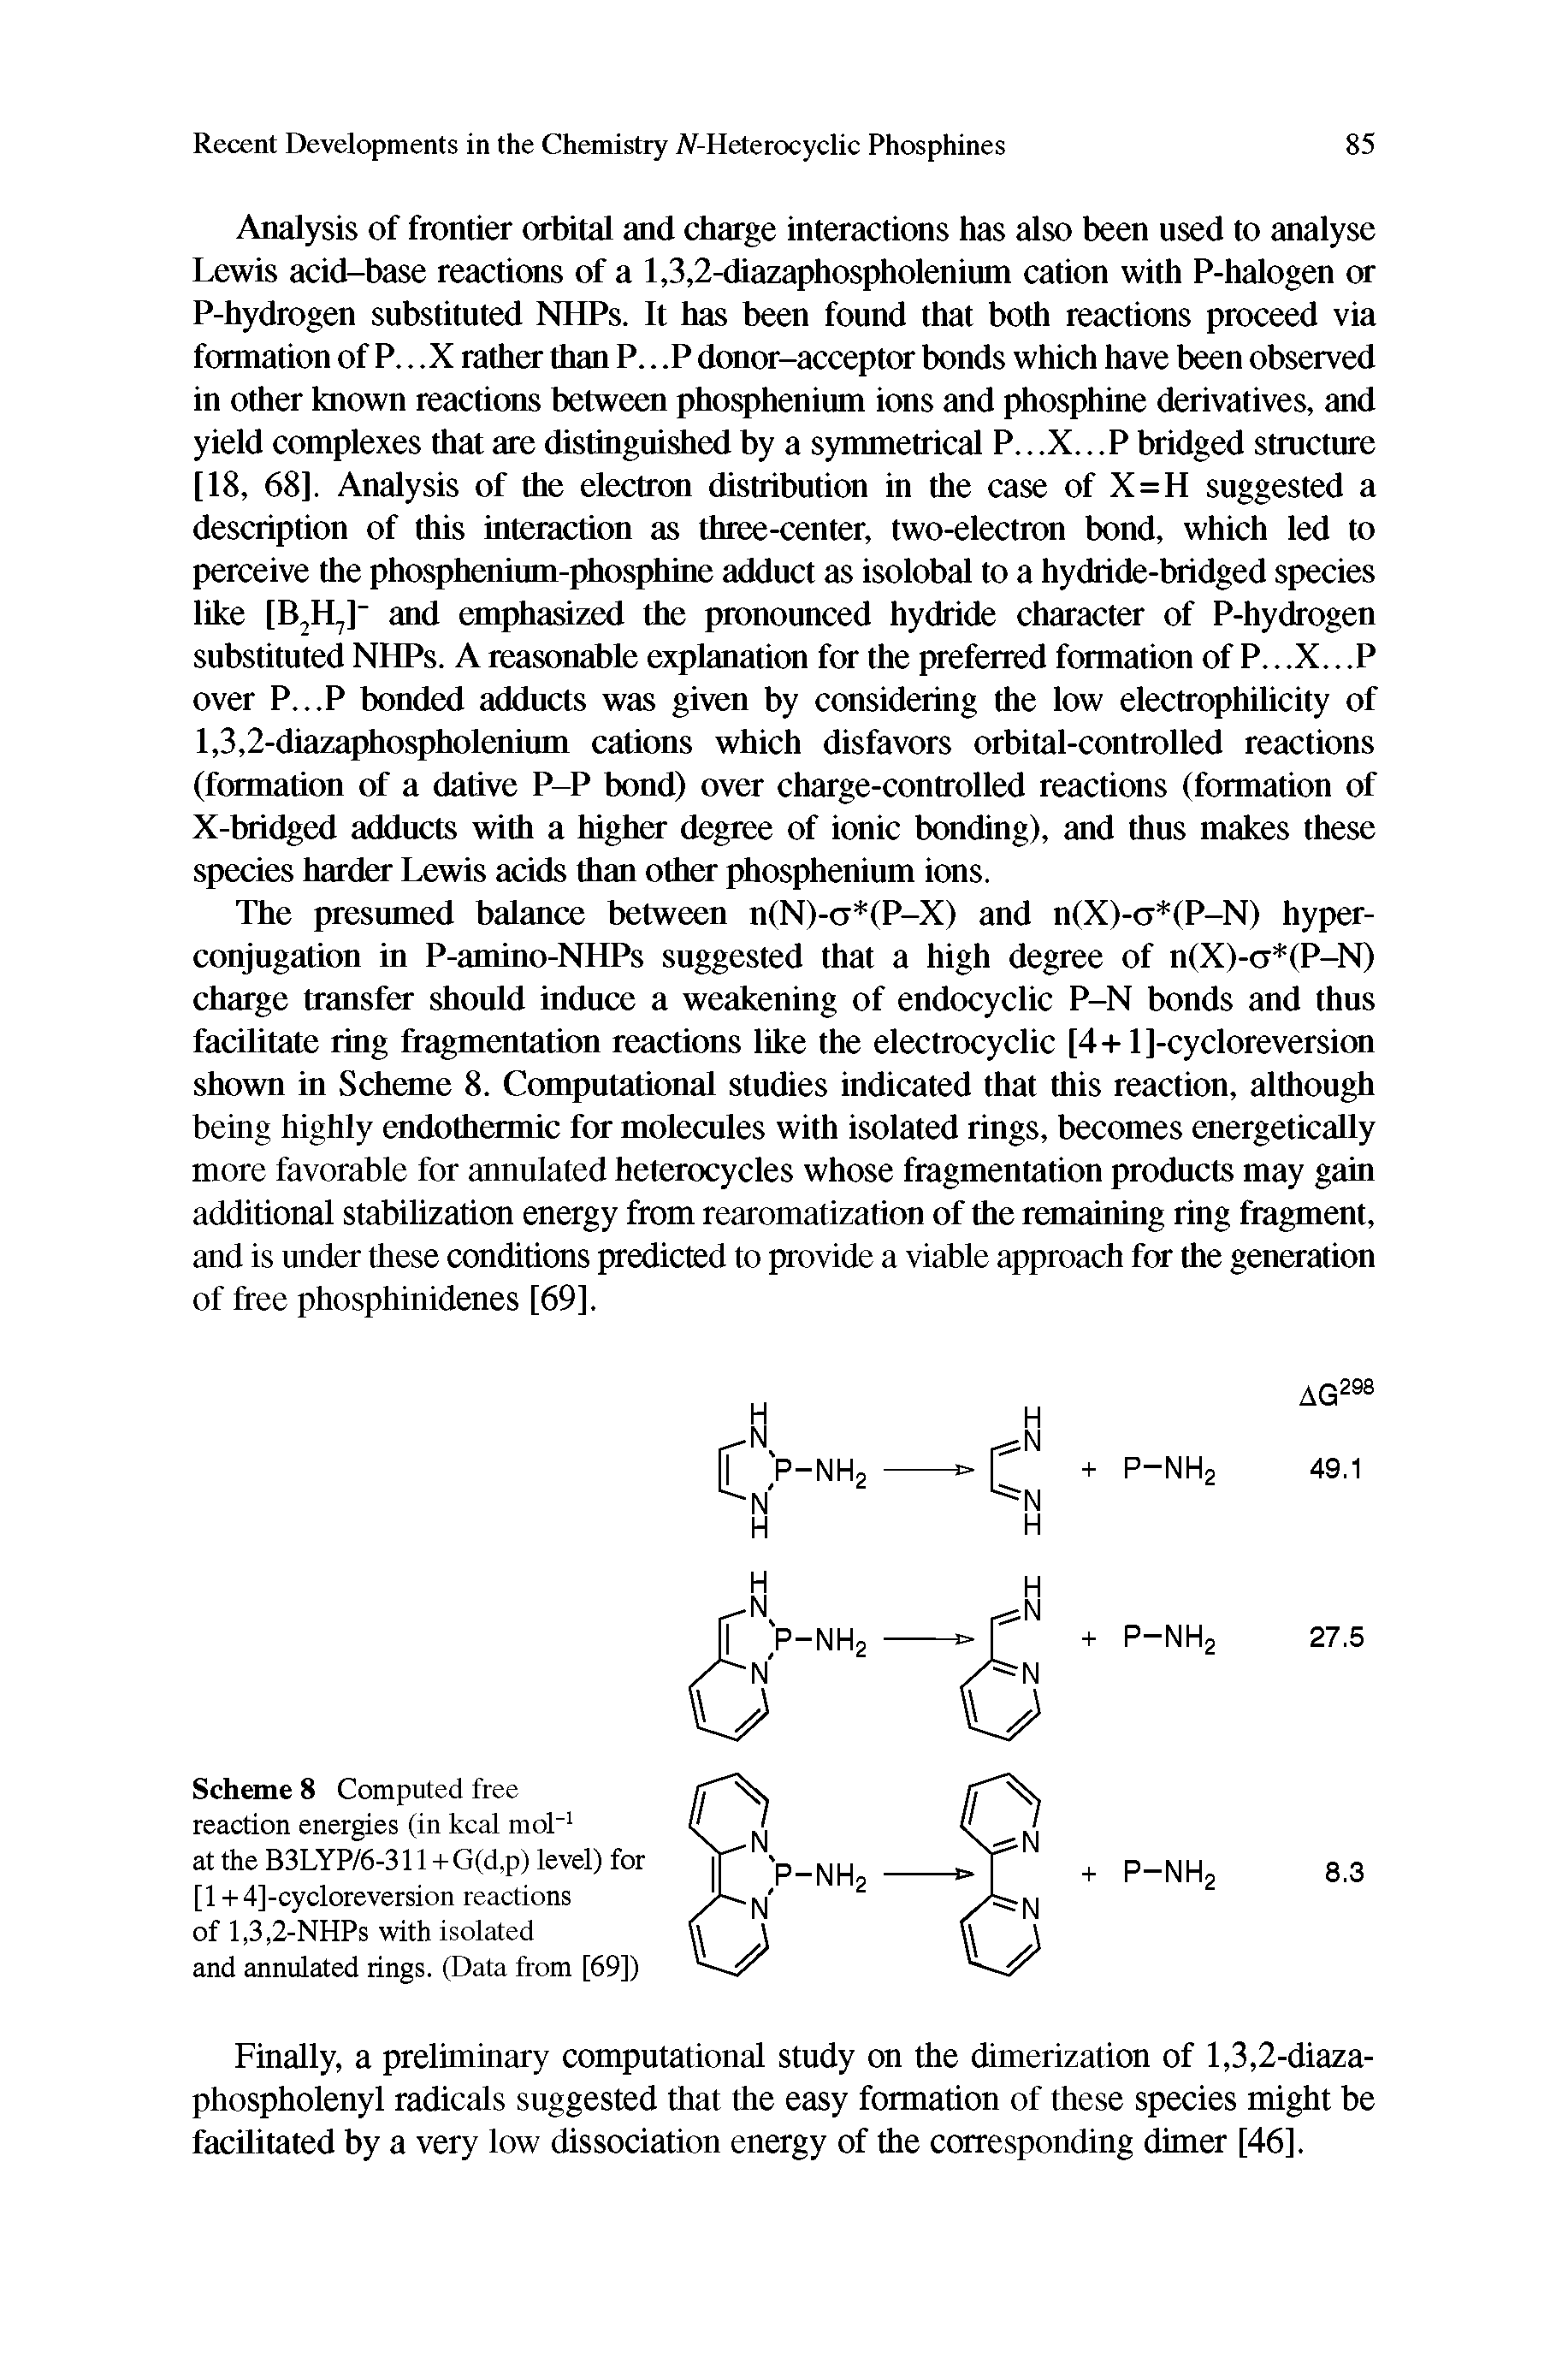 Scheme 8 Computed free reaction energies (in kcal mol-1 at the B3LYP/6-311 + G(d,p) level) for [1 + 4]-cycloreversion reactions of 1,3,2-NHPs with isolated and annulated rings. (Data from [69])...